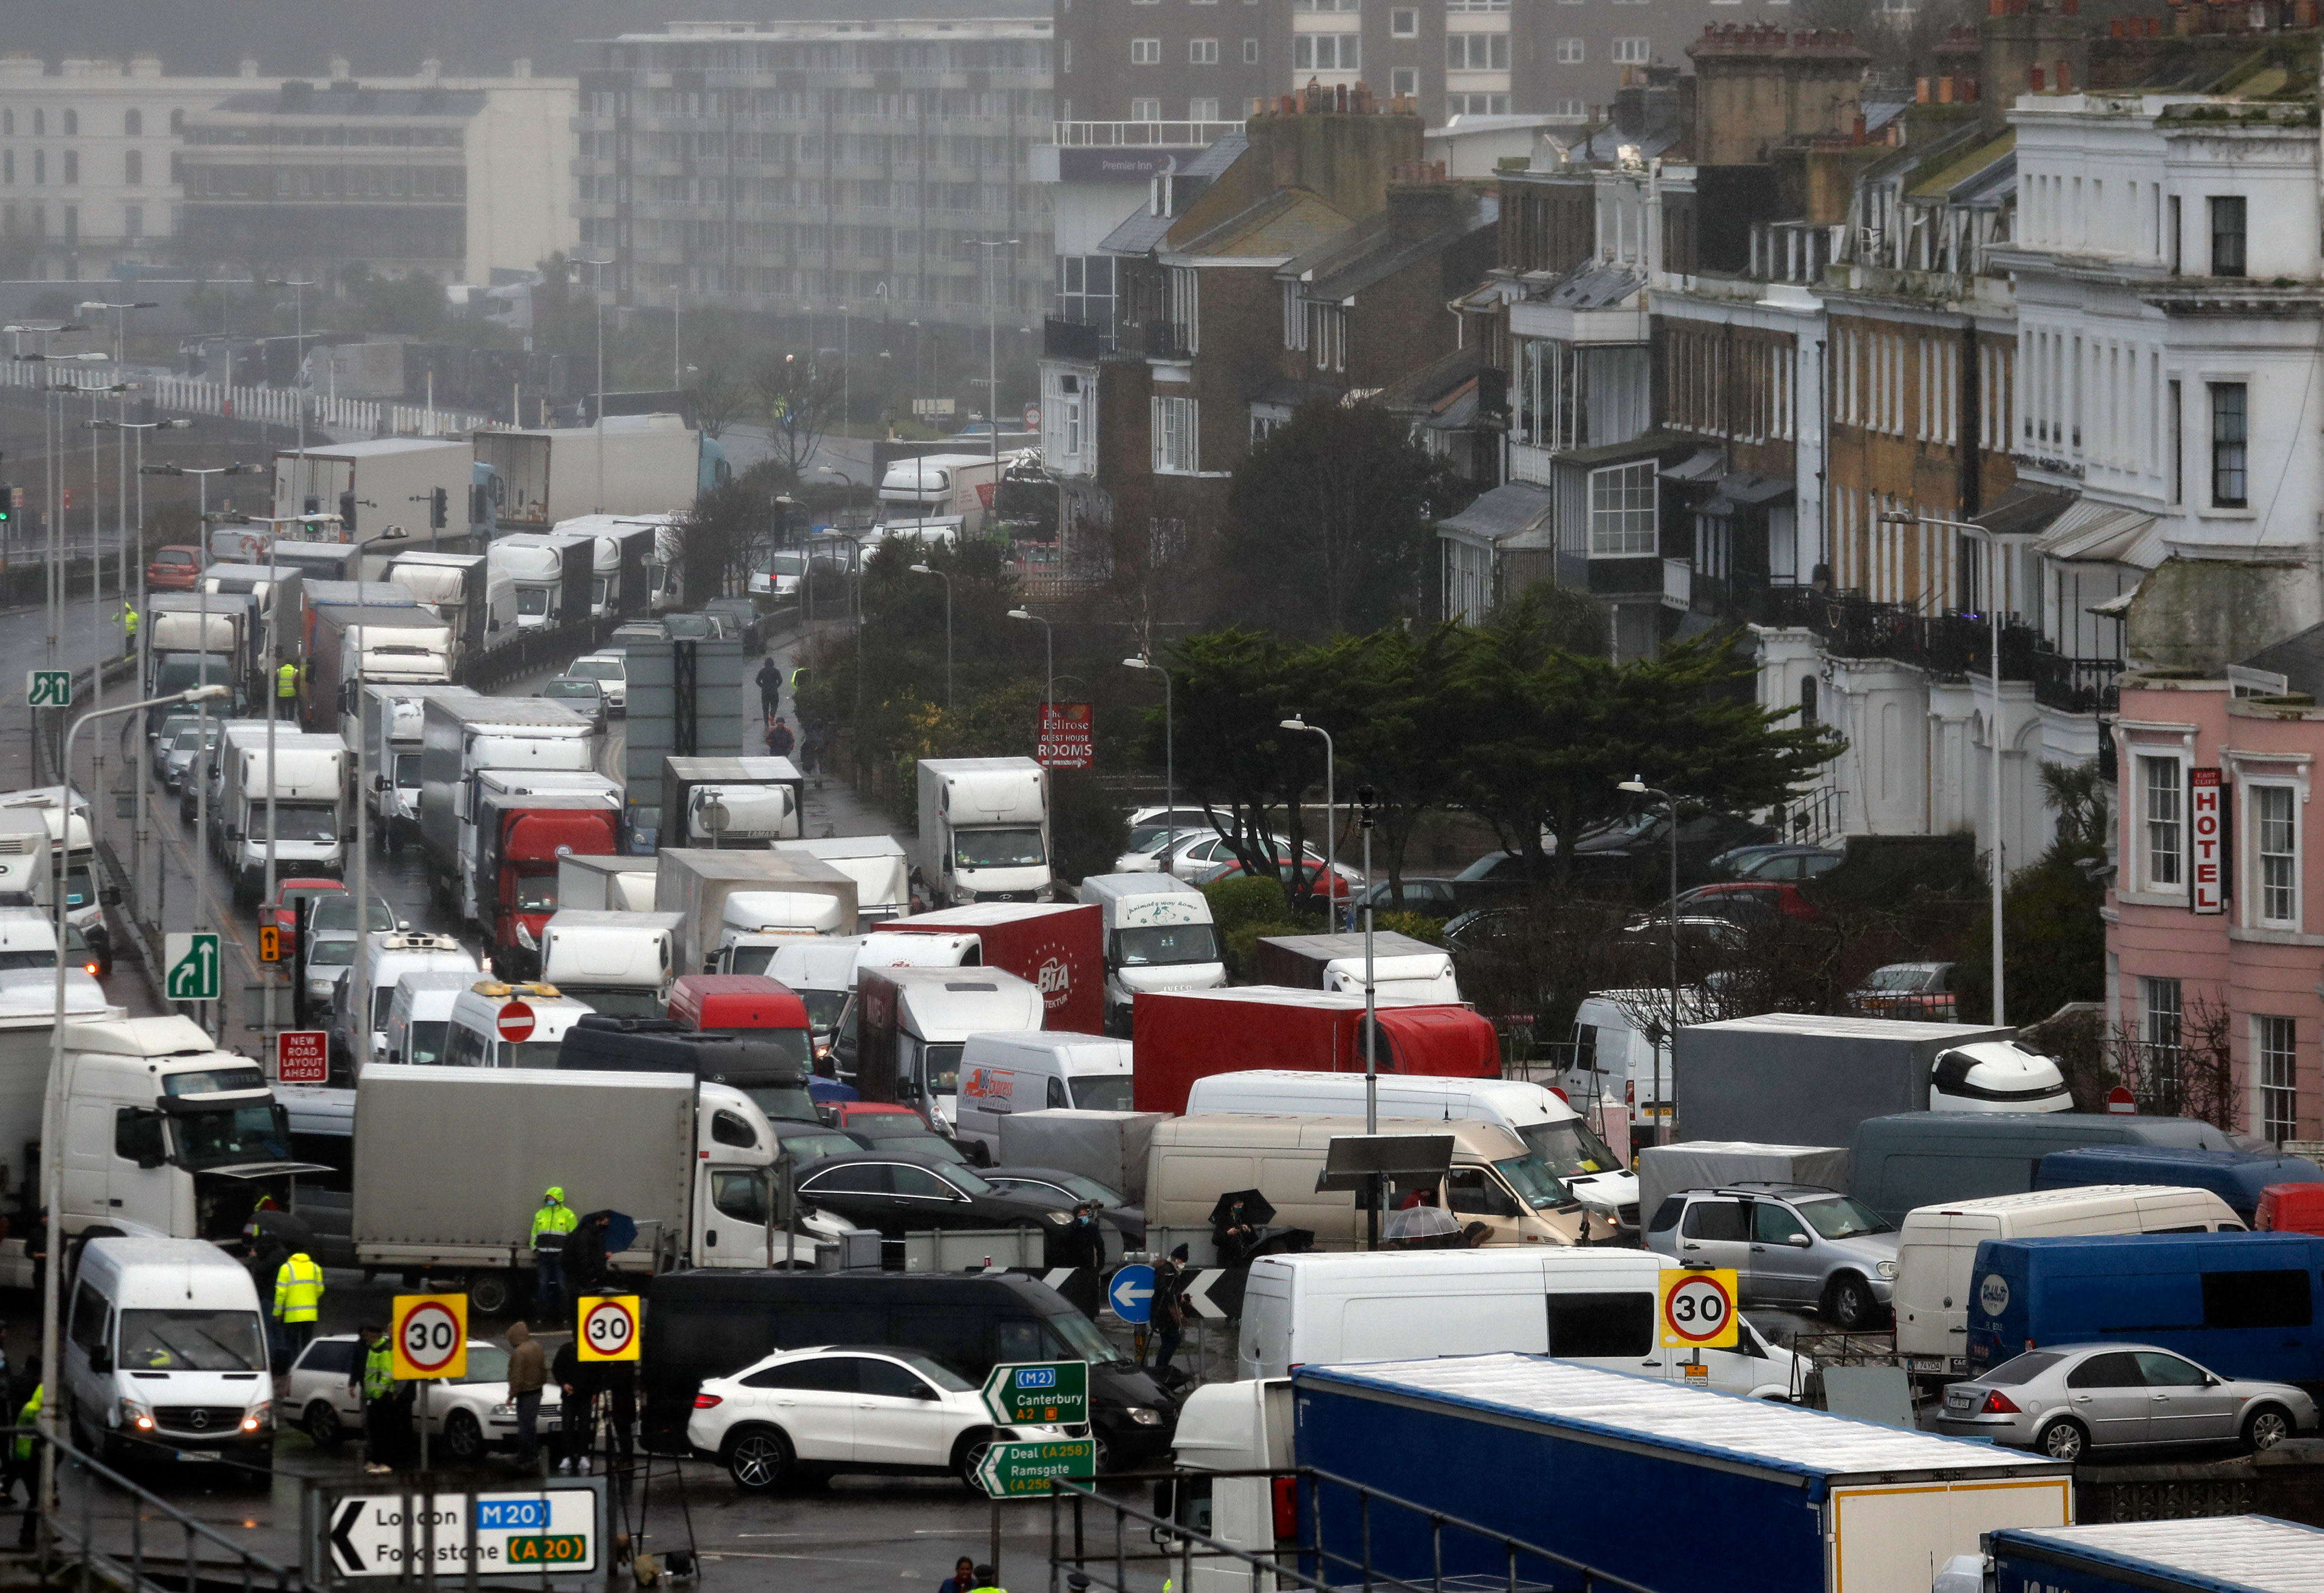 Vehicles queue at the blocked entrance to the Port of Dover in England on December 23.